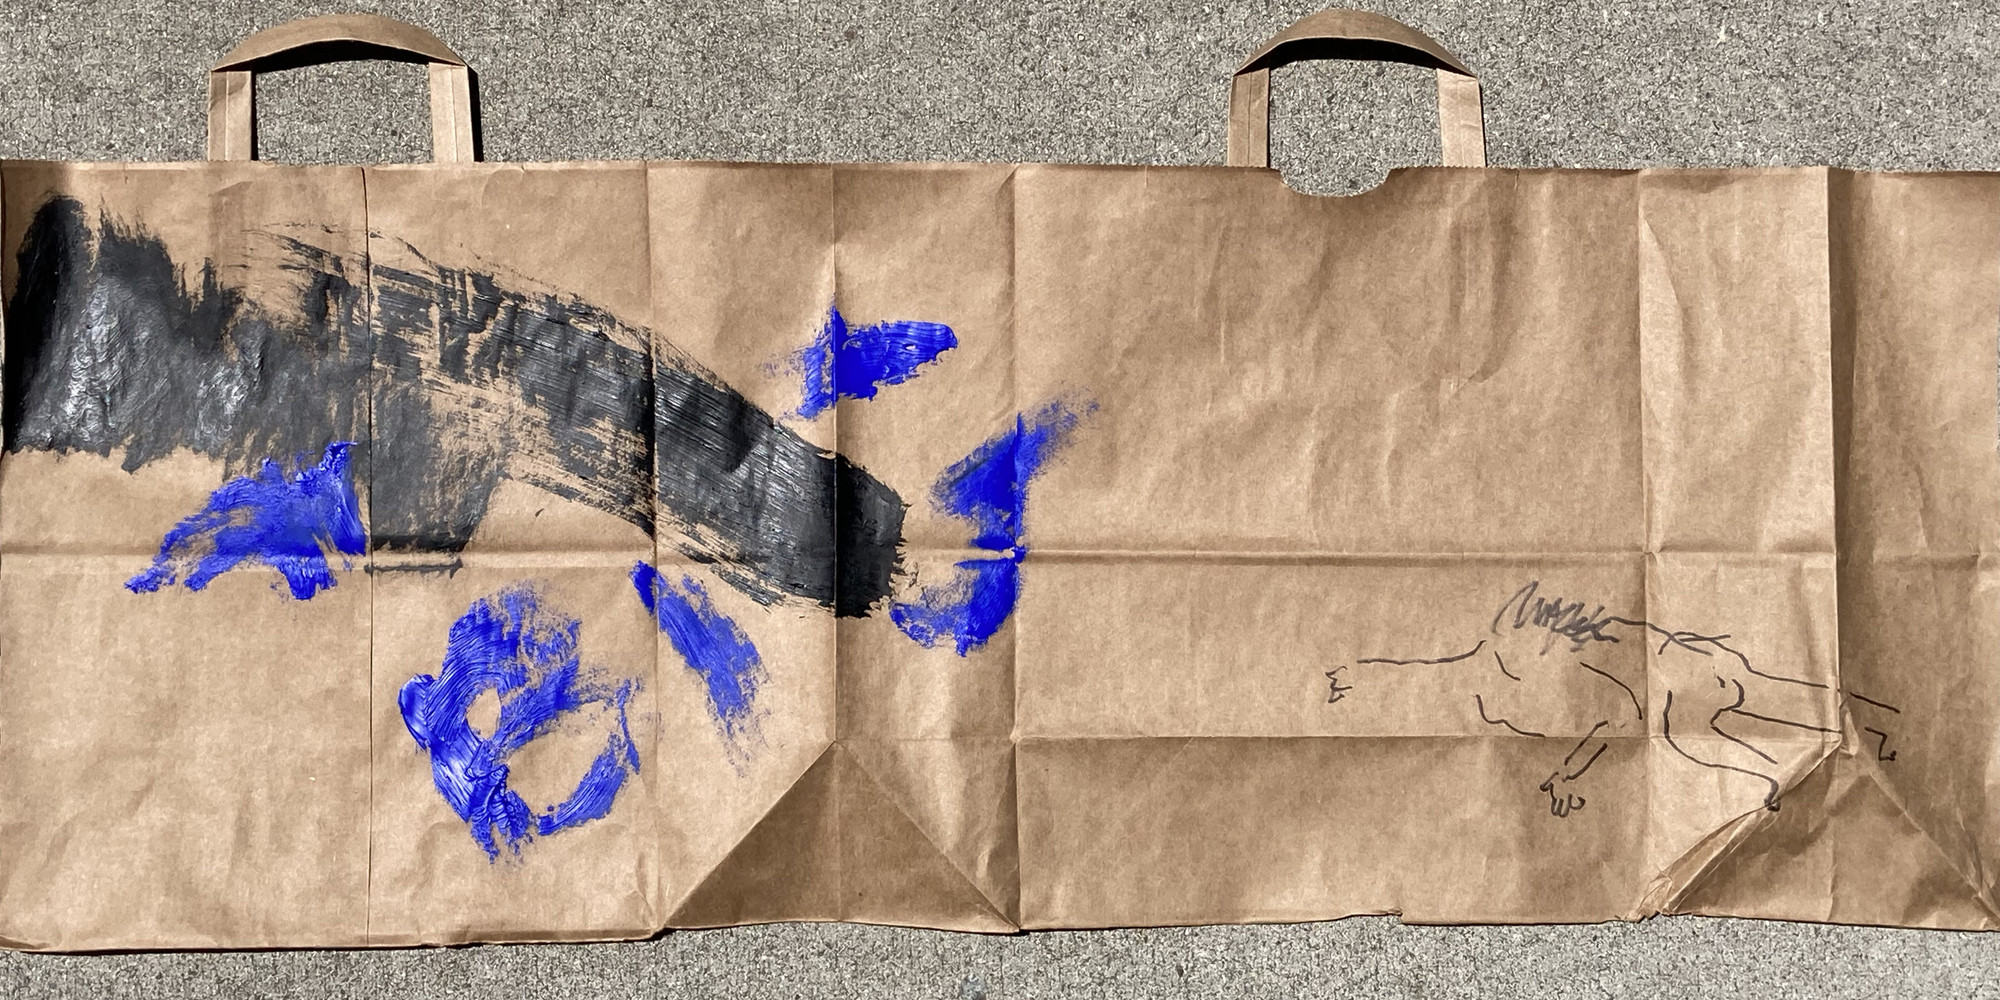 Simone Forti. Figure Bag Drawing. 2020. Acrylic and pen on grocery bag. Courtesy the artist